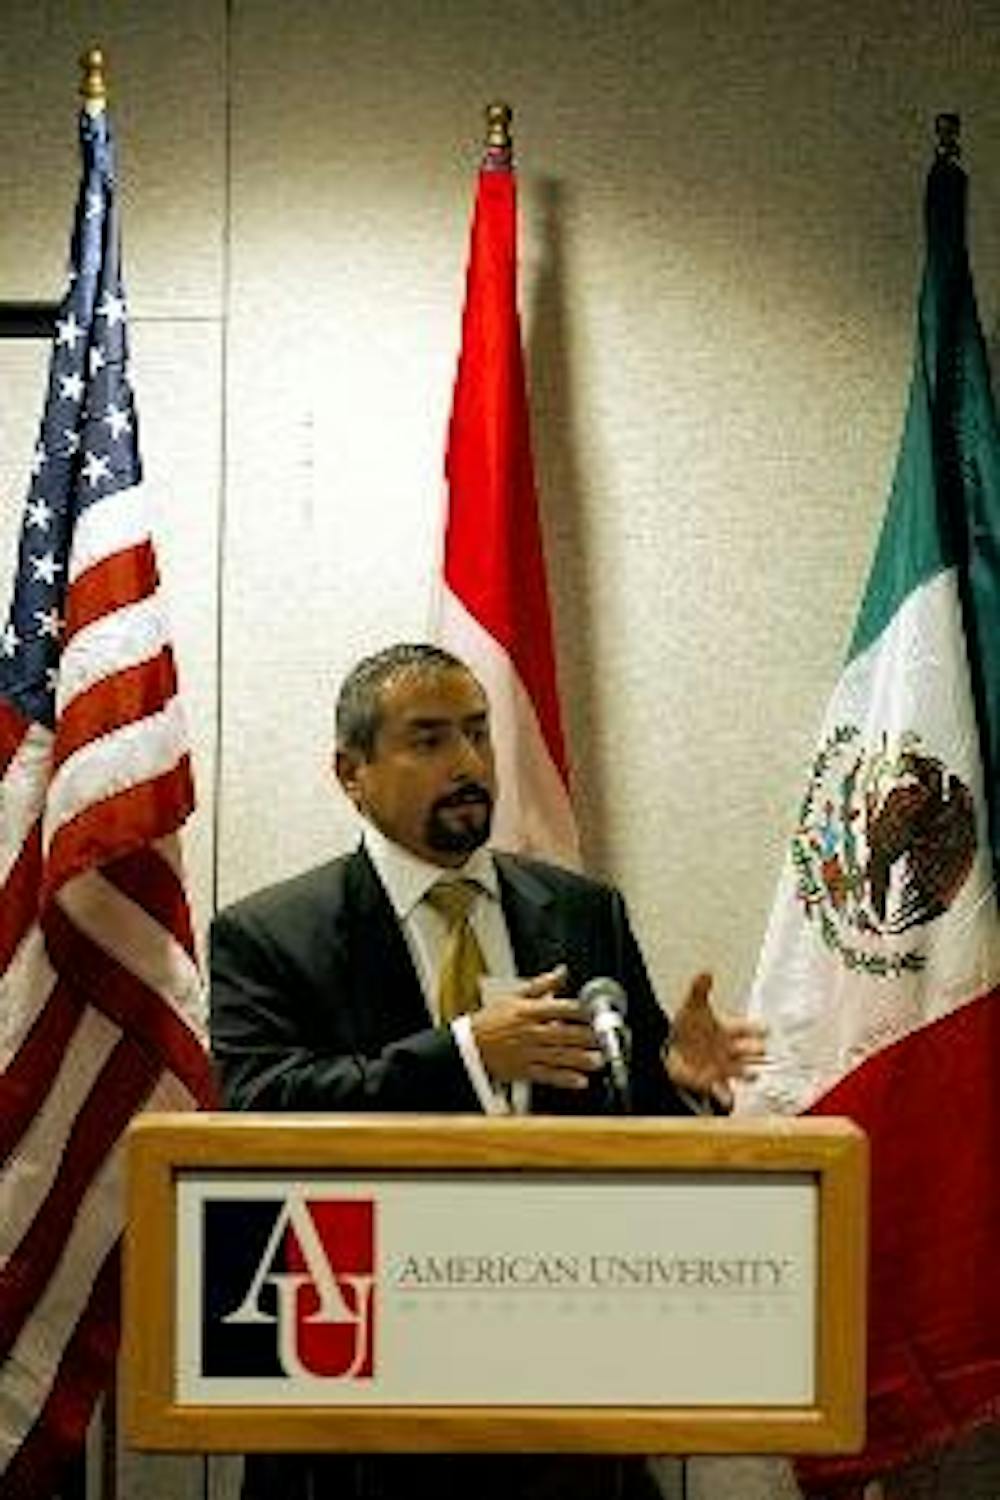 Diplomat-in-Residence Daniel Hern&aacute;ndez discusses immigration.